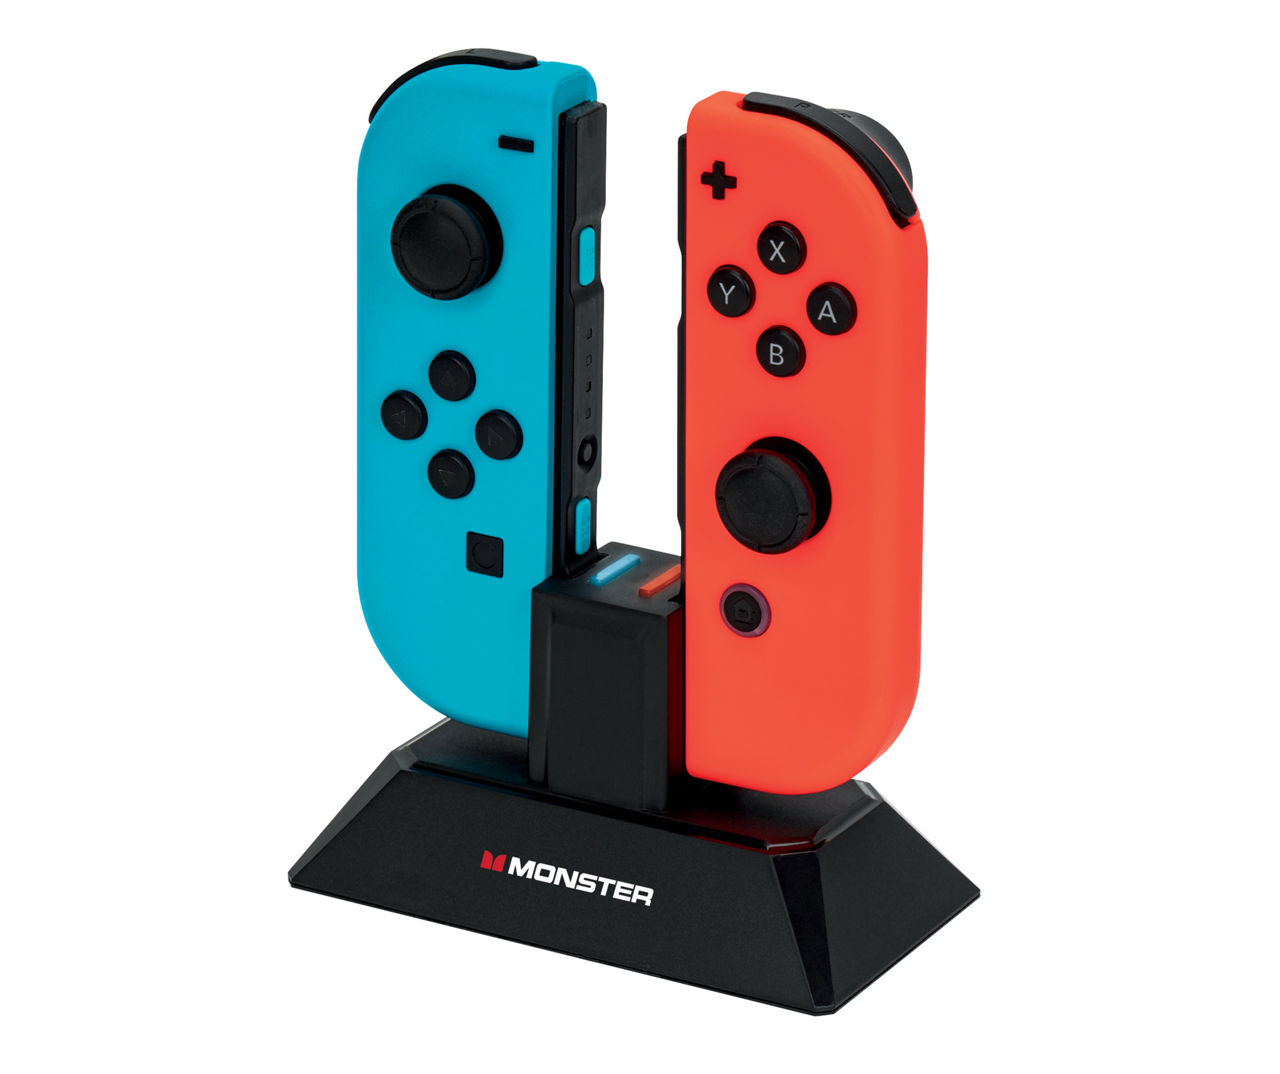 Monster Monster Nintendo Dual Switch Controller Charging Station | Big Lots